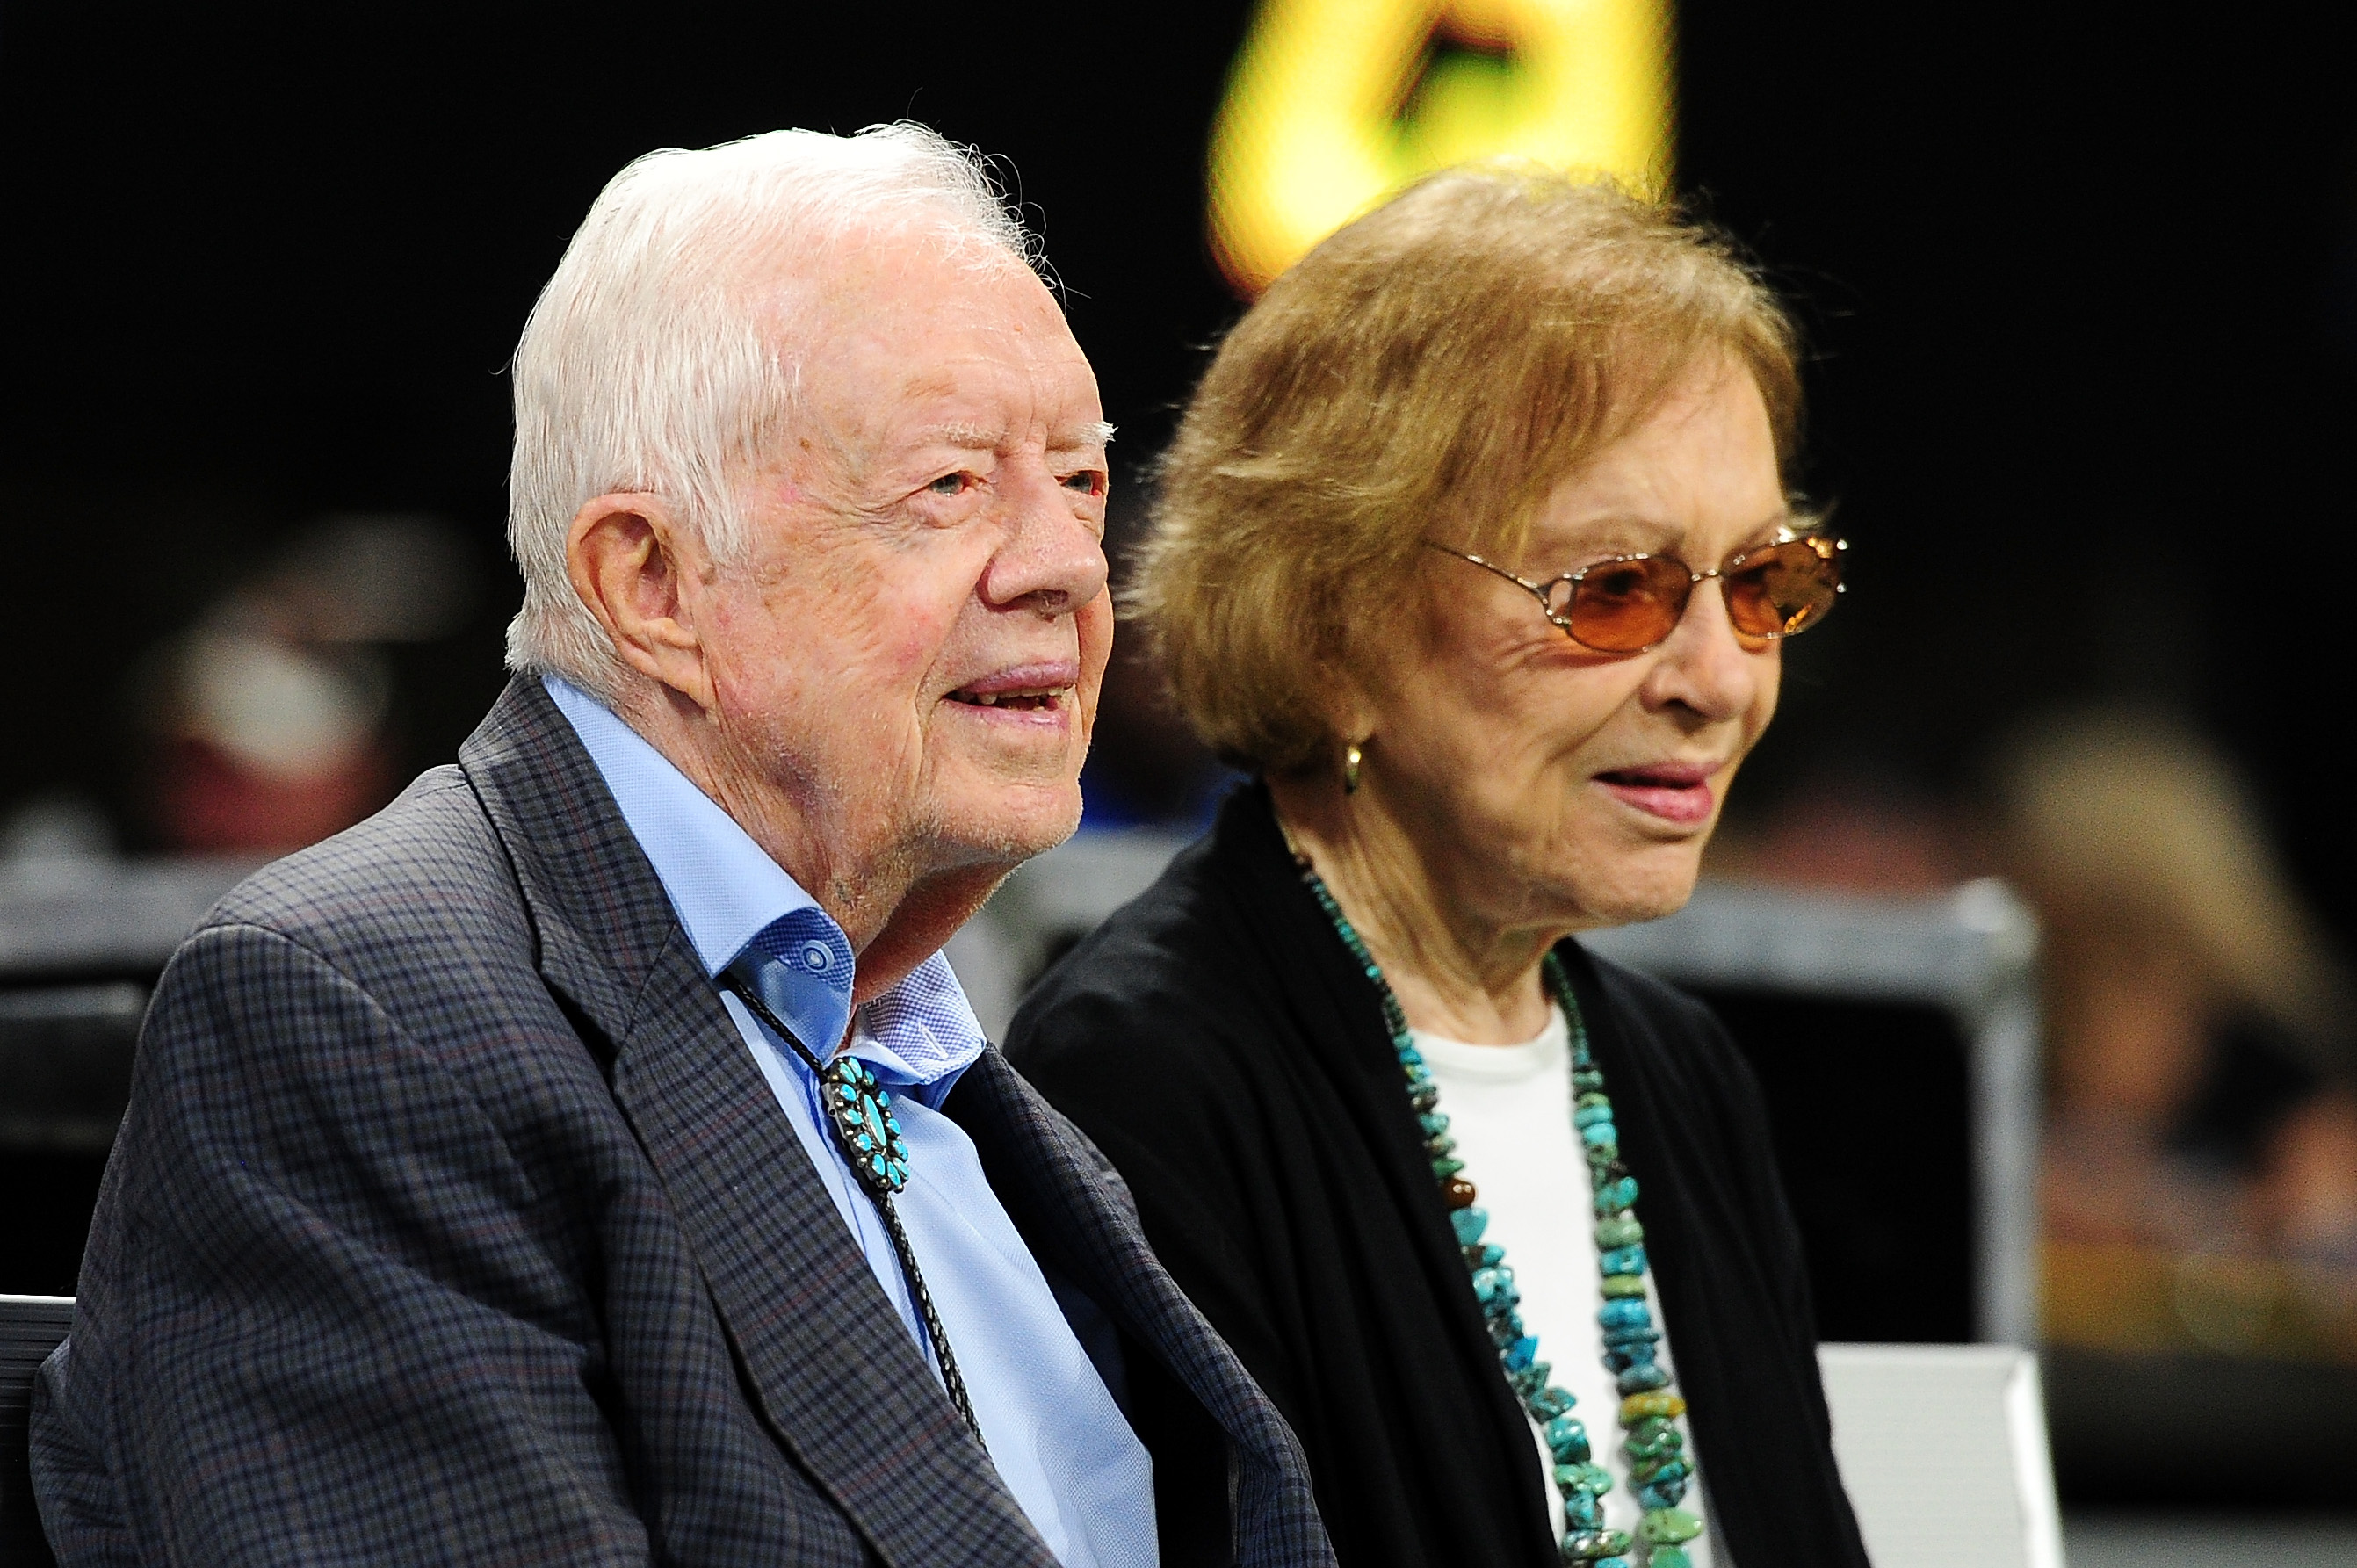 Former president Jimmy Carter and his wife Rosalynn at Mercedes-Benz Stadium on September 30, 2018, in Atlanta, Georgia. | Source: Getty Images